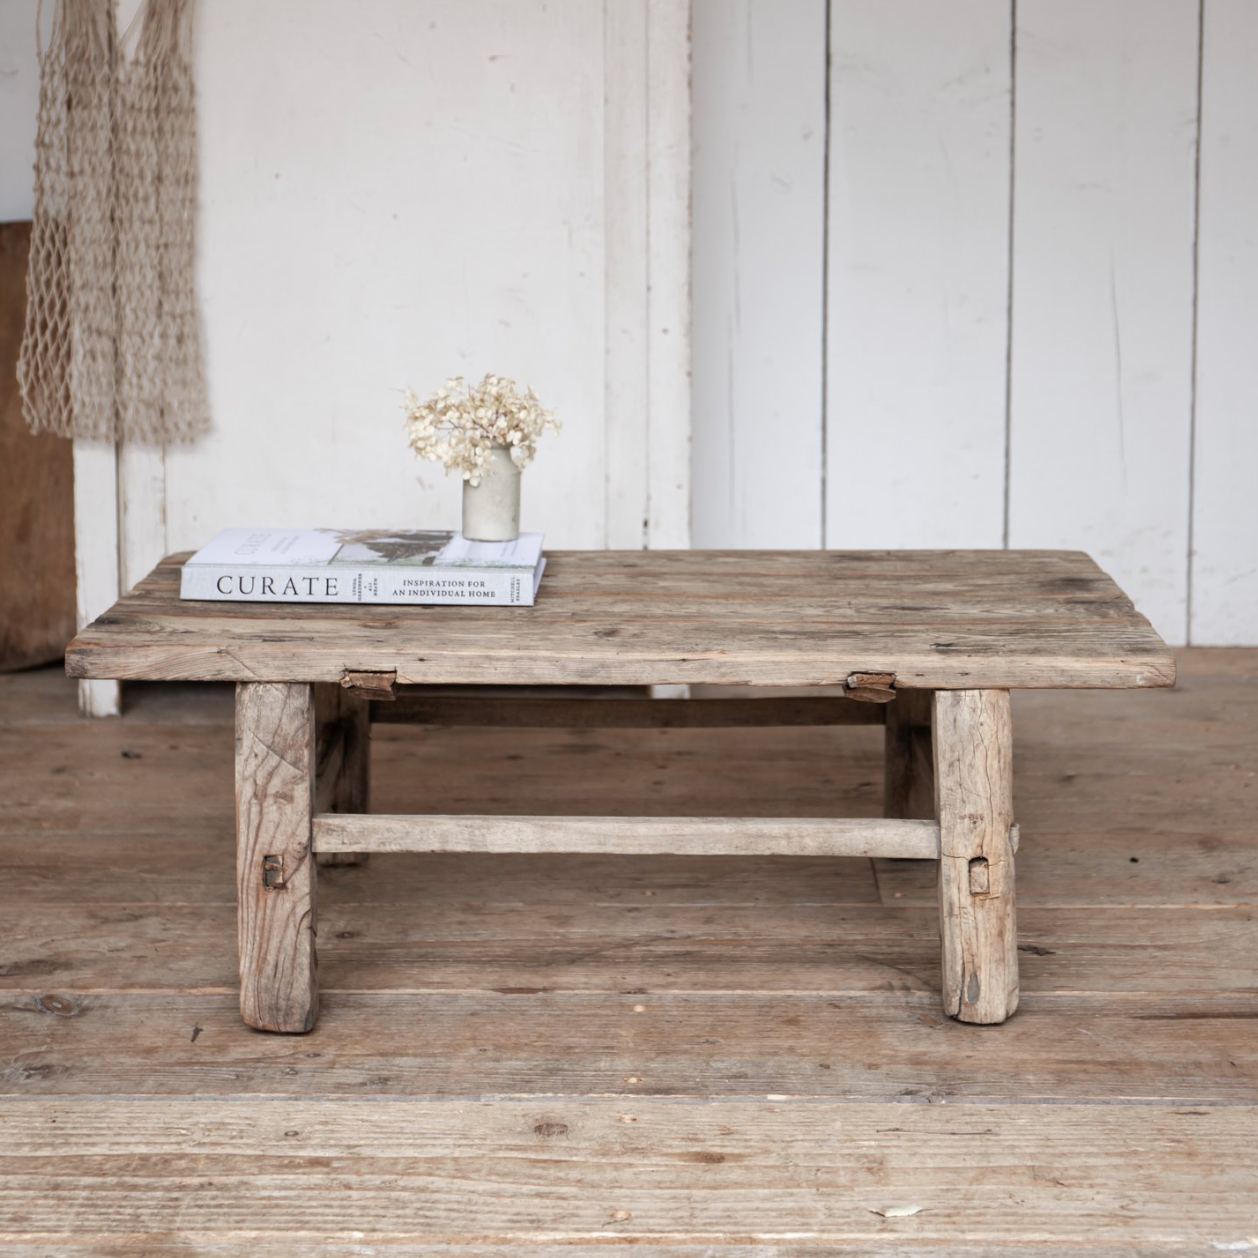 A Reclaimed Wood Coffee Table against a rustic white wooden wall.